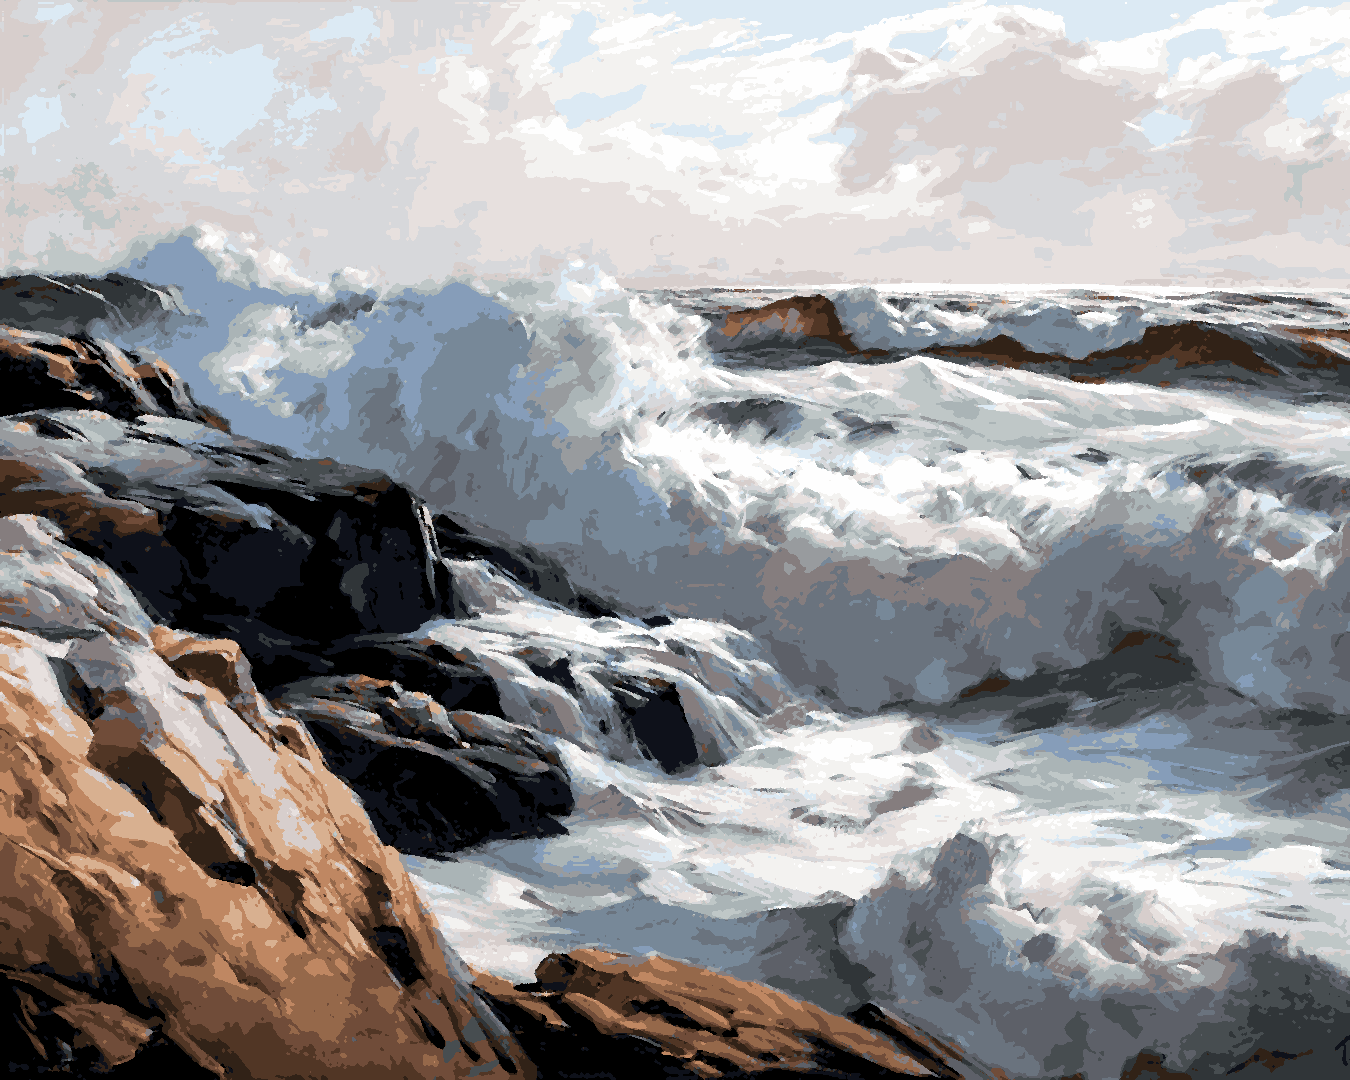 Storm Collection PD (2) - After the Storm by Frederick Judd Waugh - Van-Go Paint-By-Number Kit